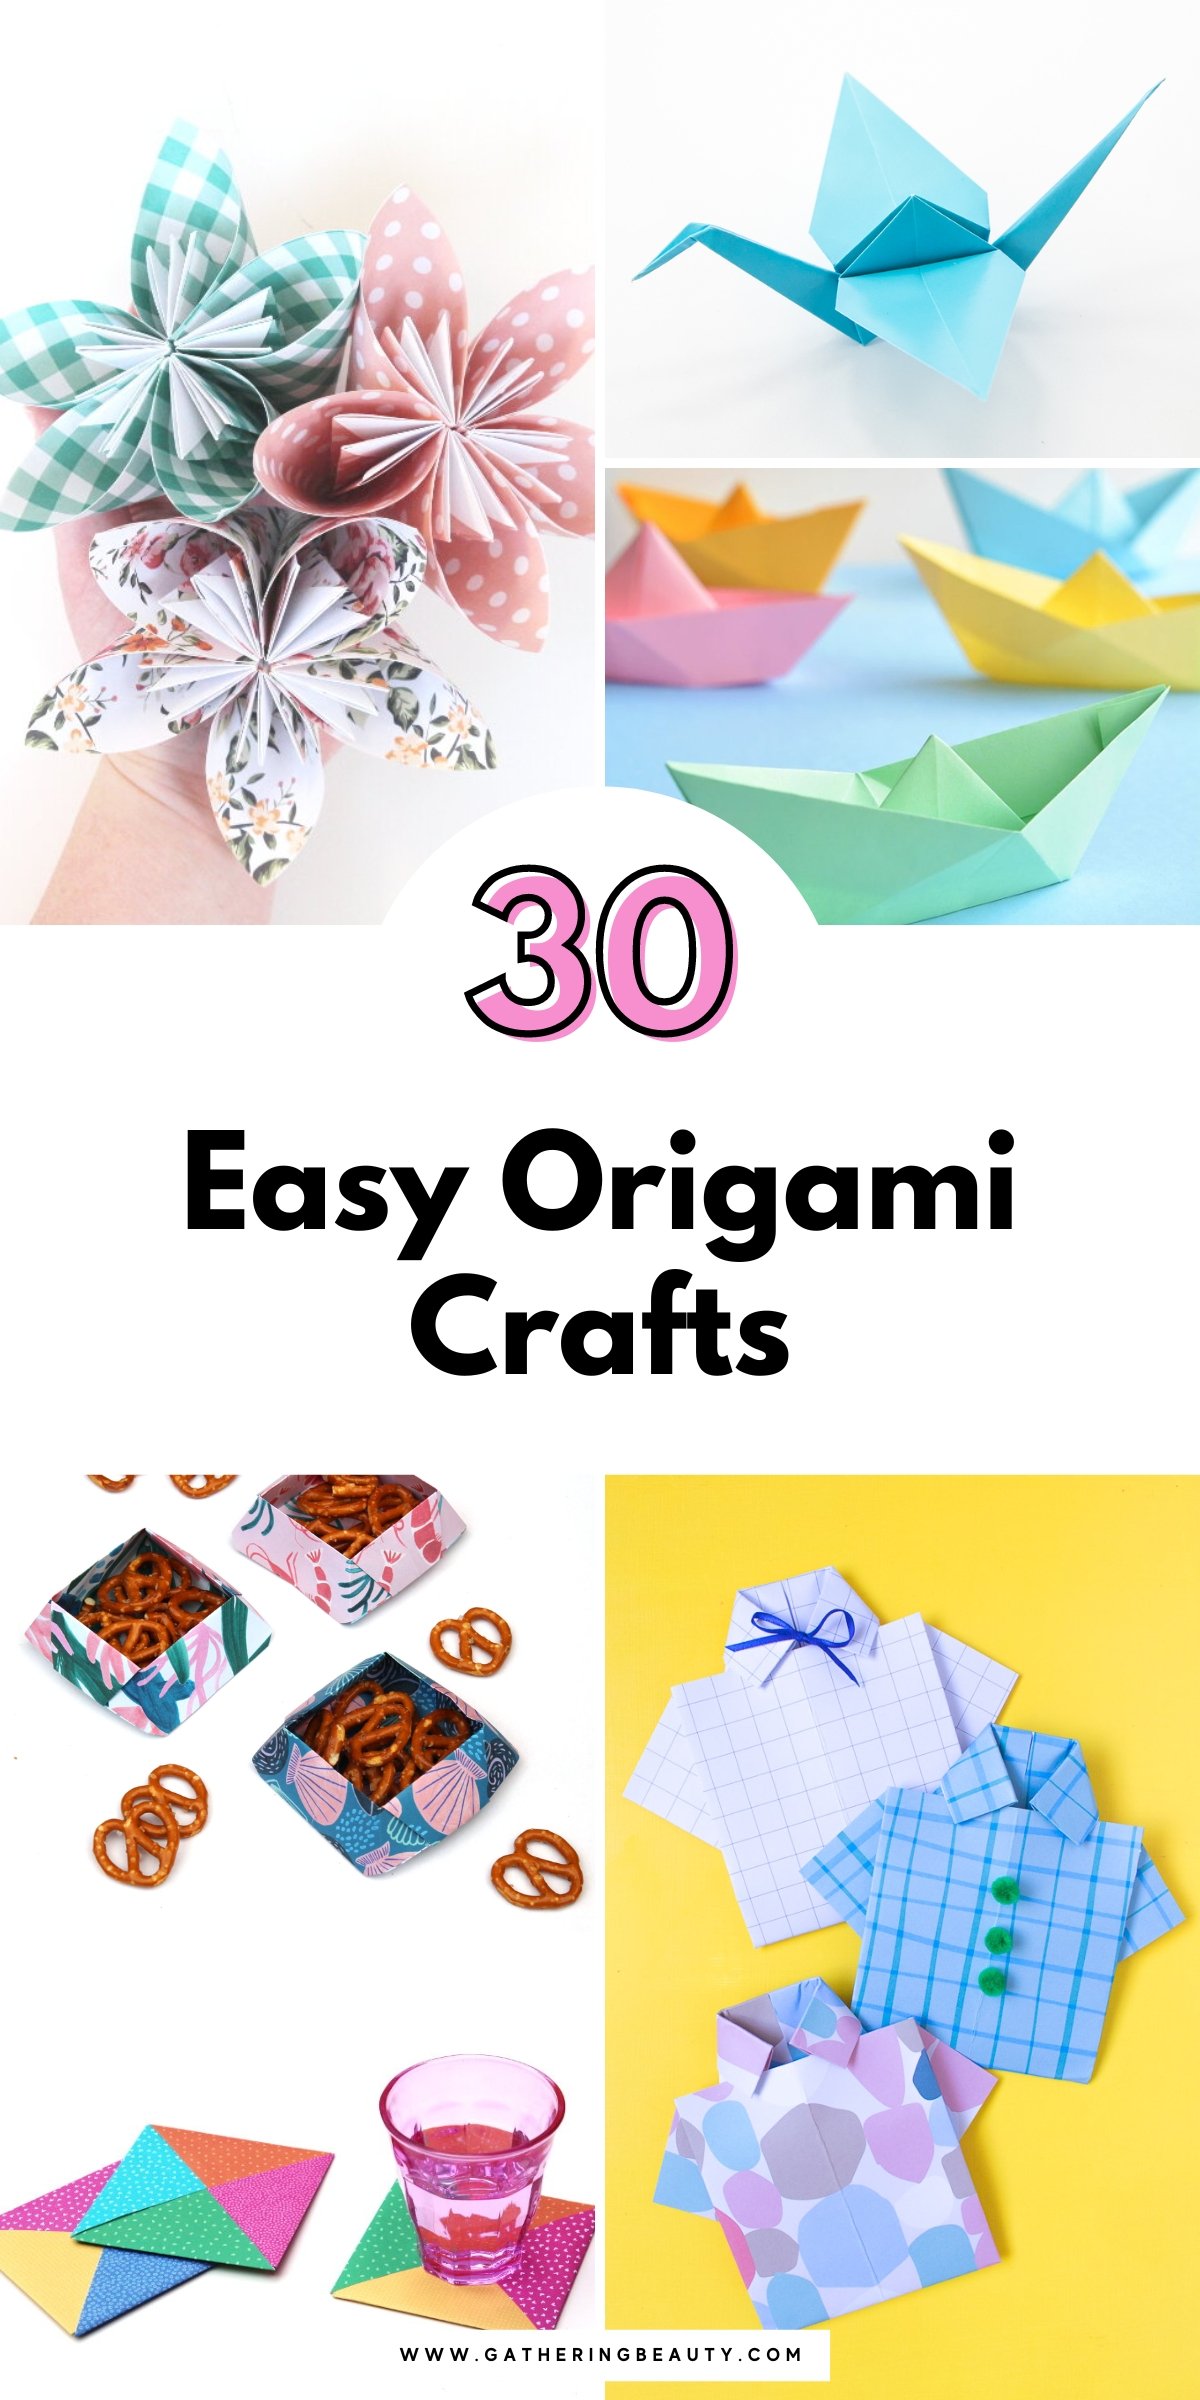 30 Easy Origami Crafts — Gathering Beauty